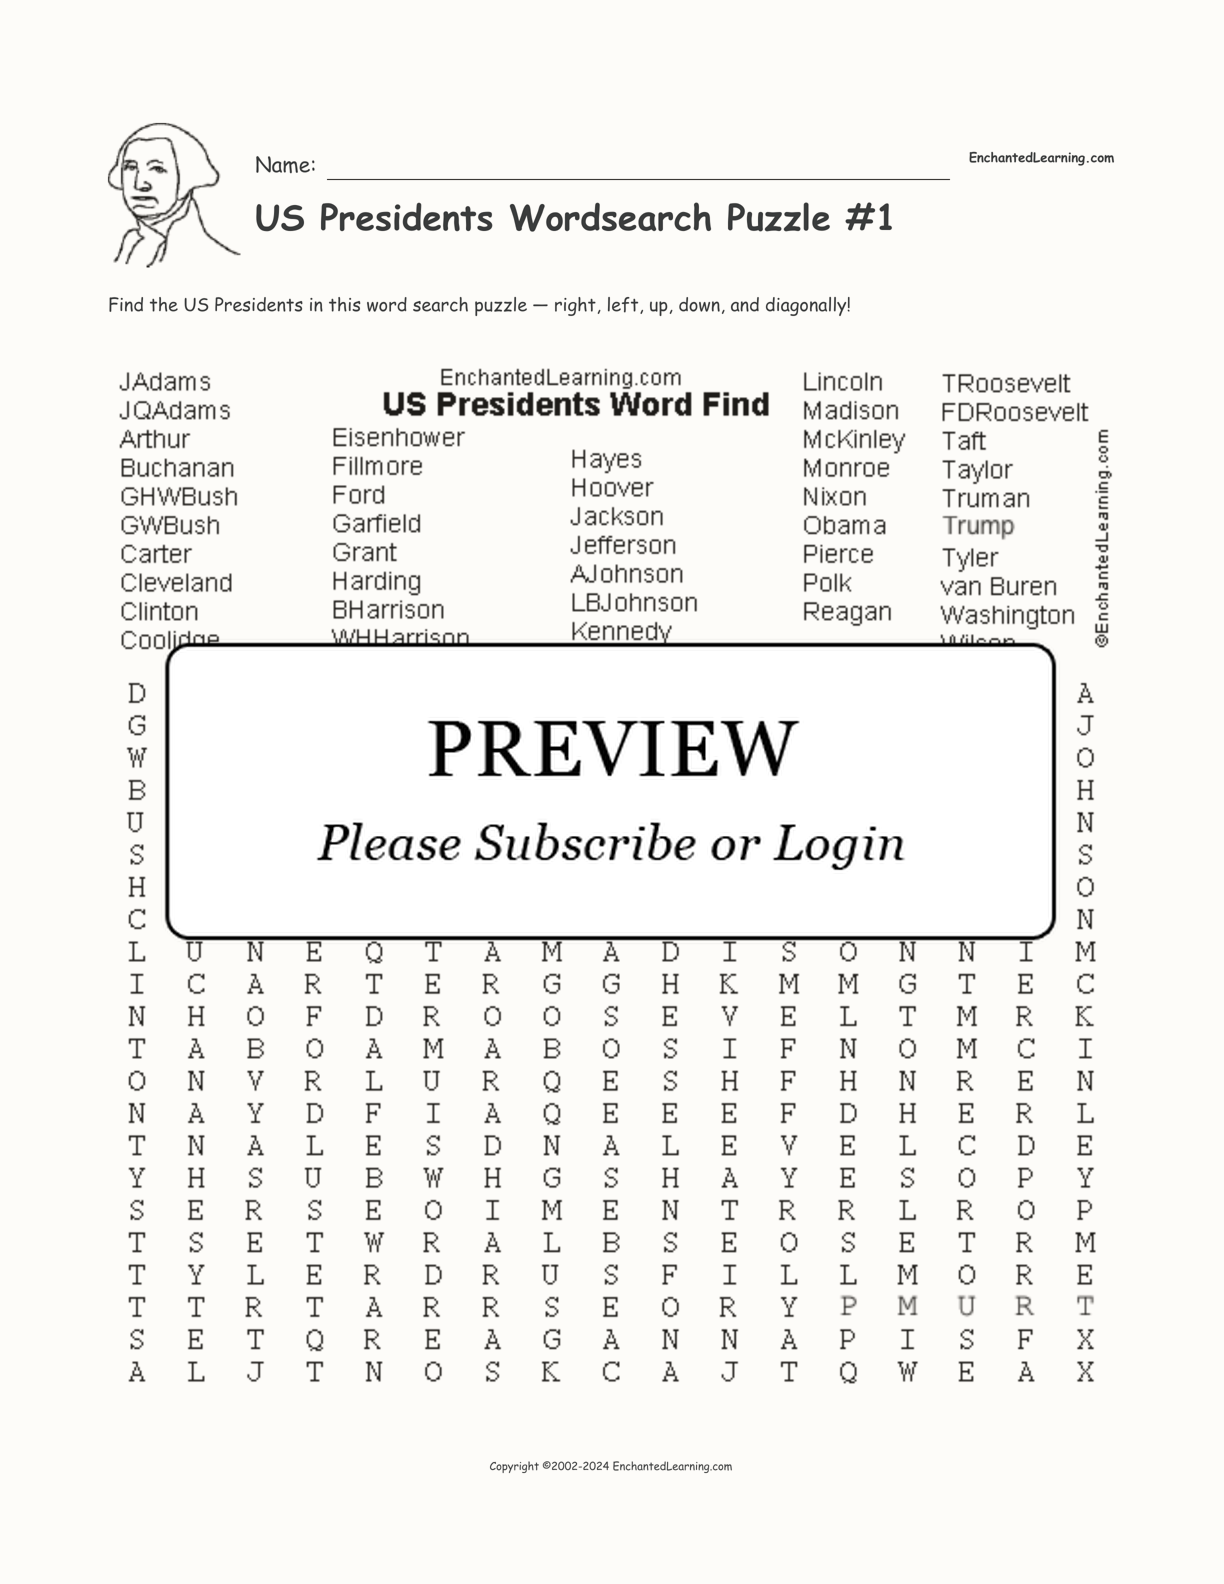 US Presidents Wordsearch Puzzle #1 interactive worksheet page 1